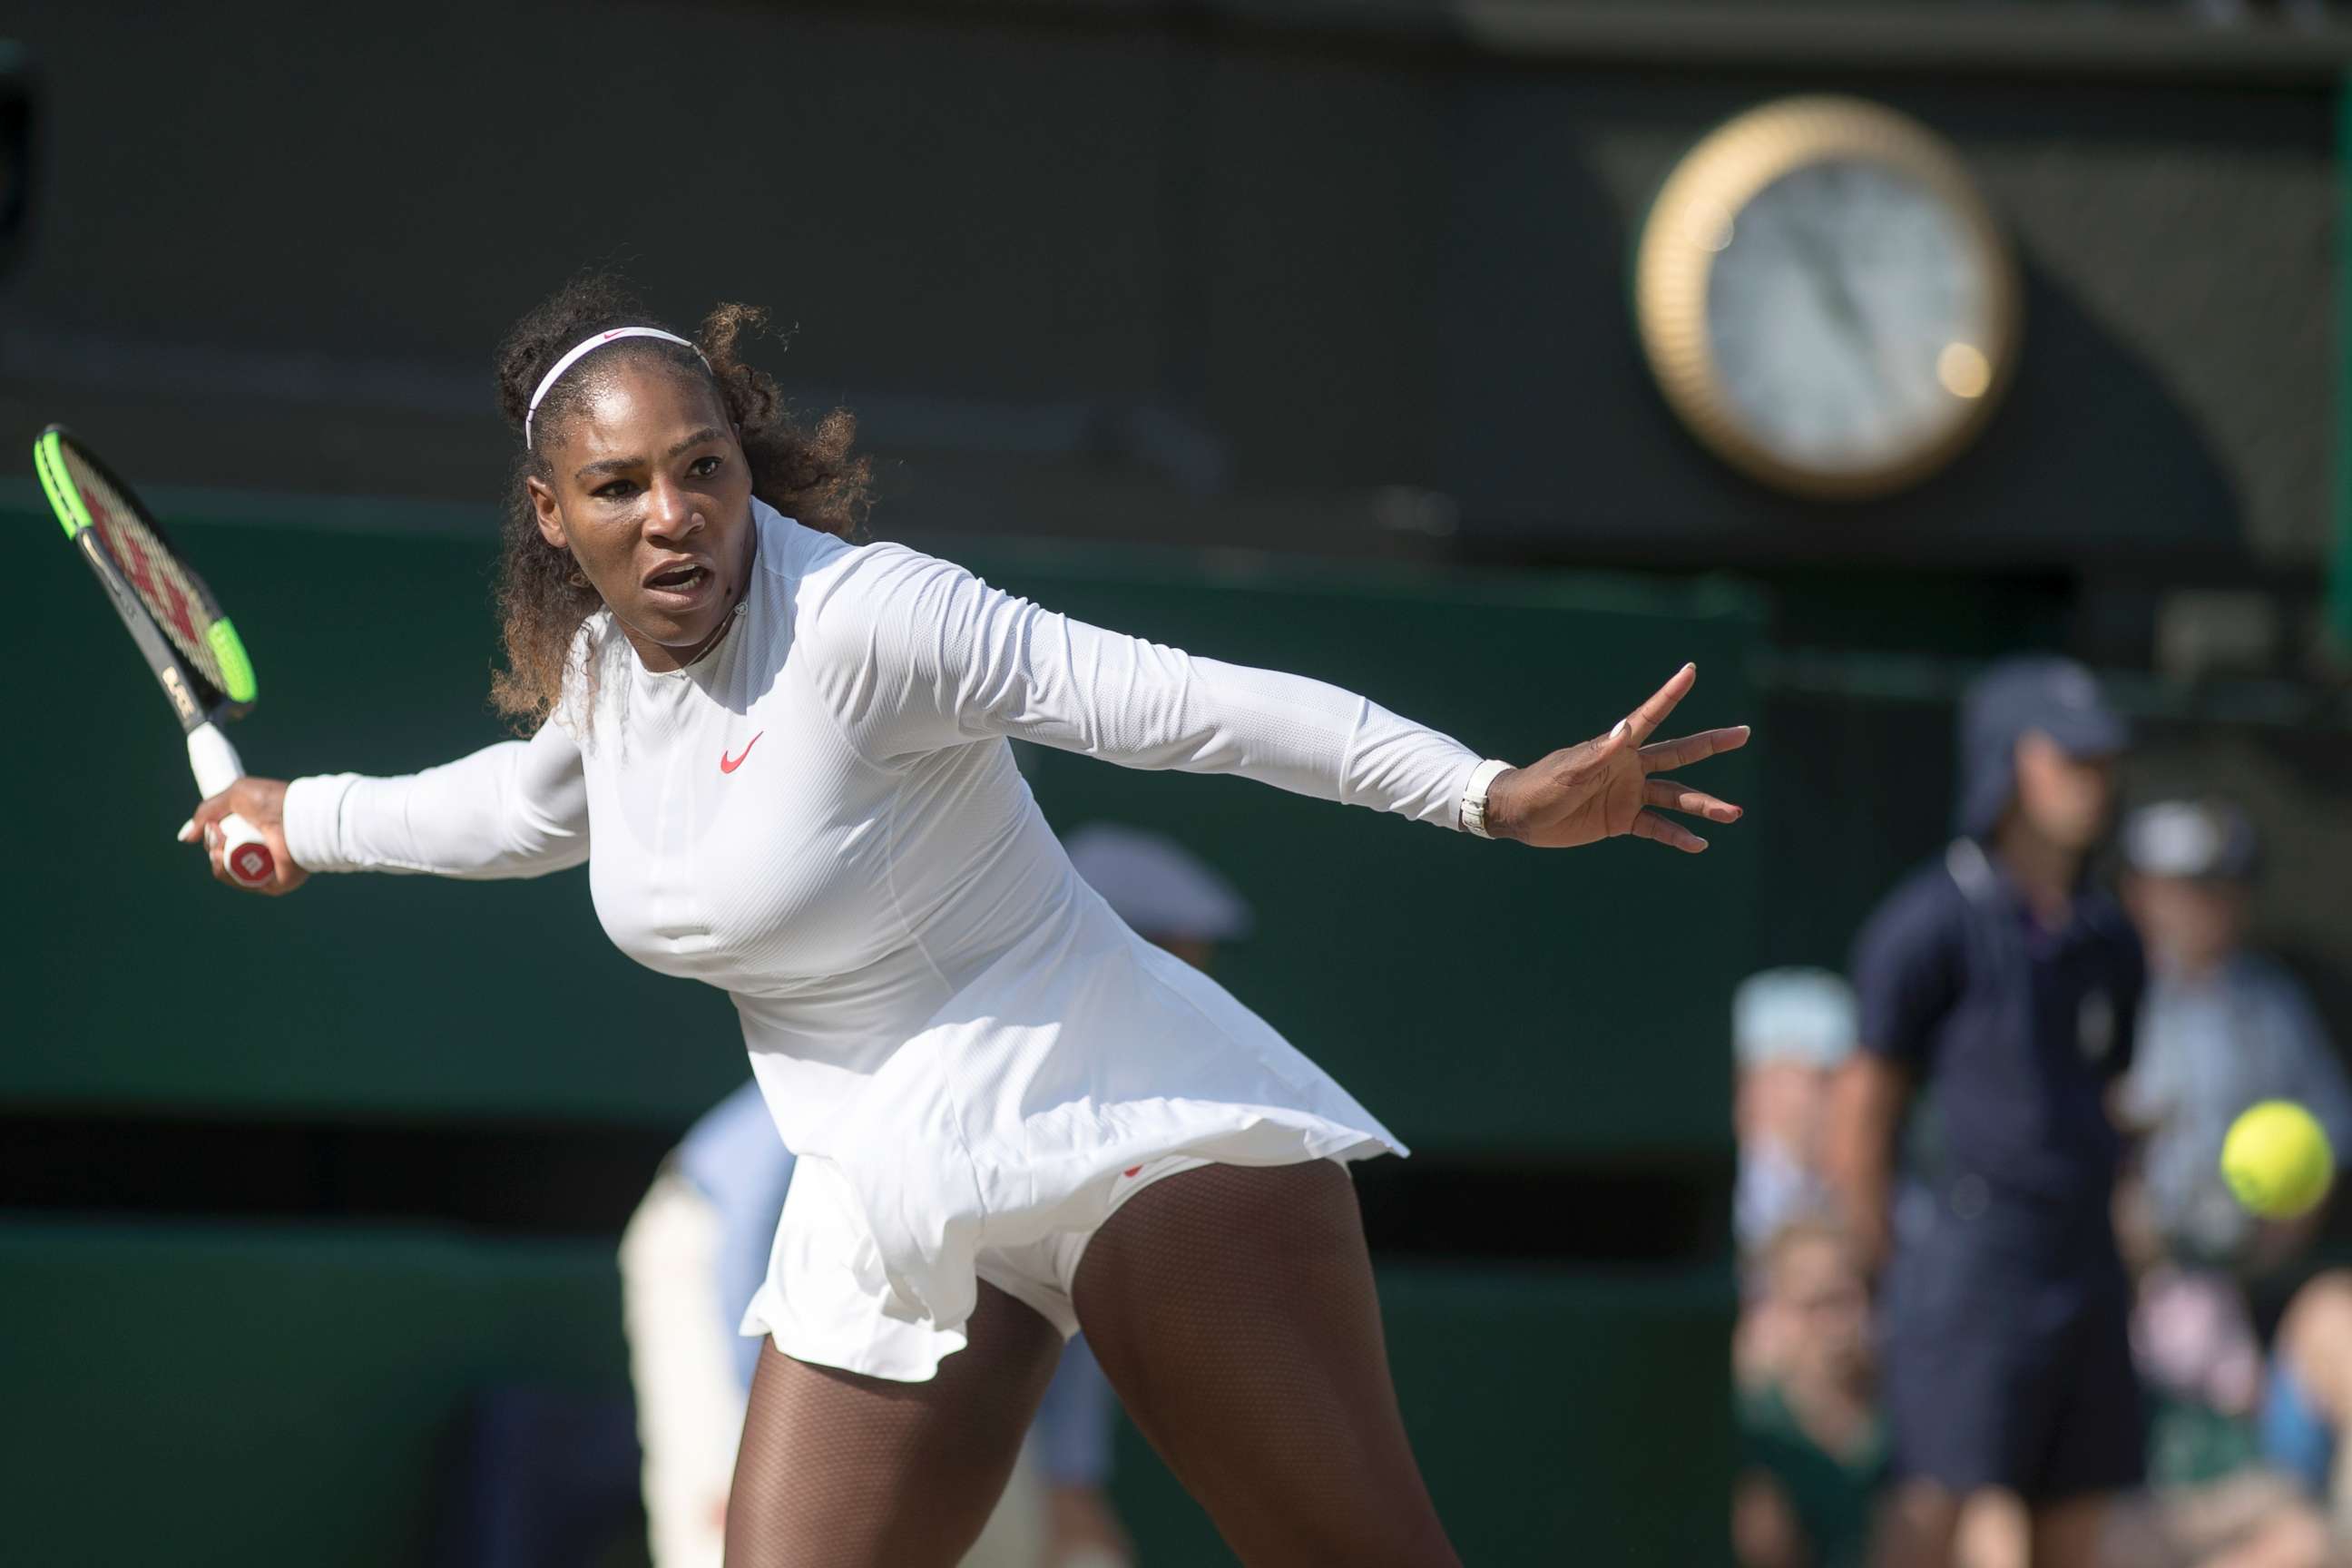 PHOTO: Serena Williams of the U.S. in action against Angelique Kerber of Germany in the Ladies' Singles Final during the Wimbledon Lawn Tennis Championships at the All England Lawn Tennis and Croquet Club at Wimbledon, July 14, 2018, in London.